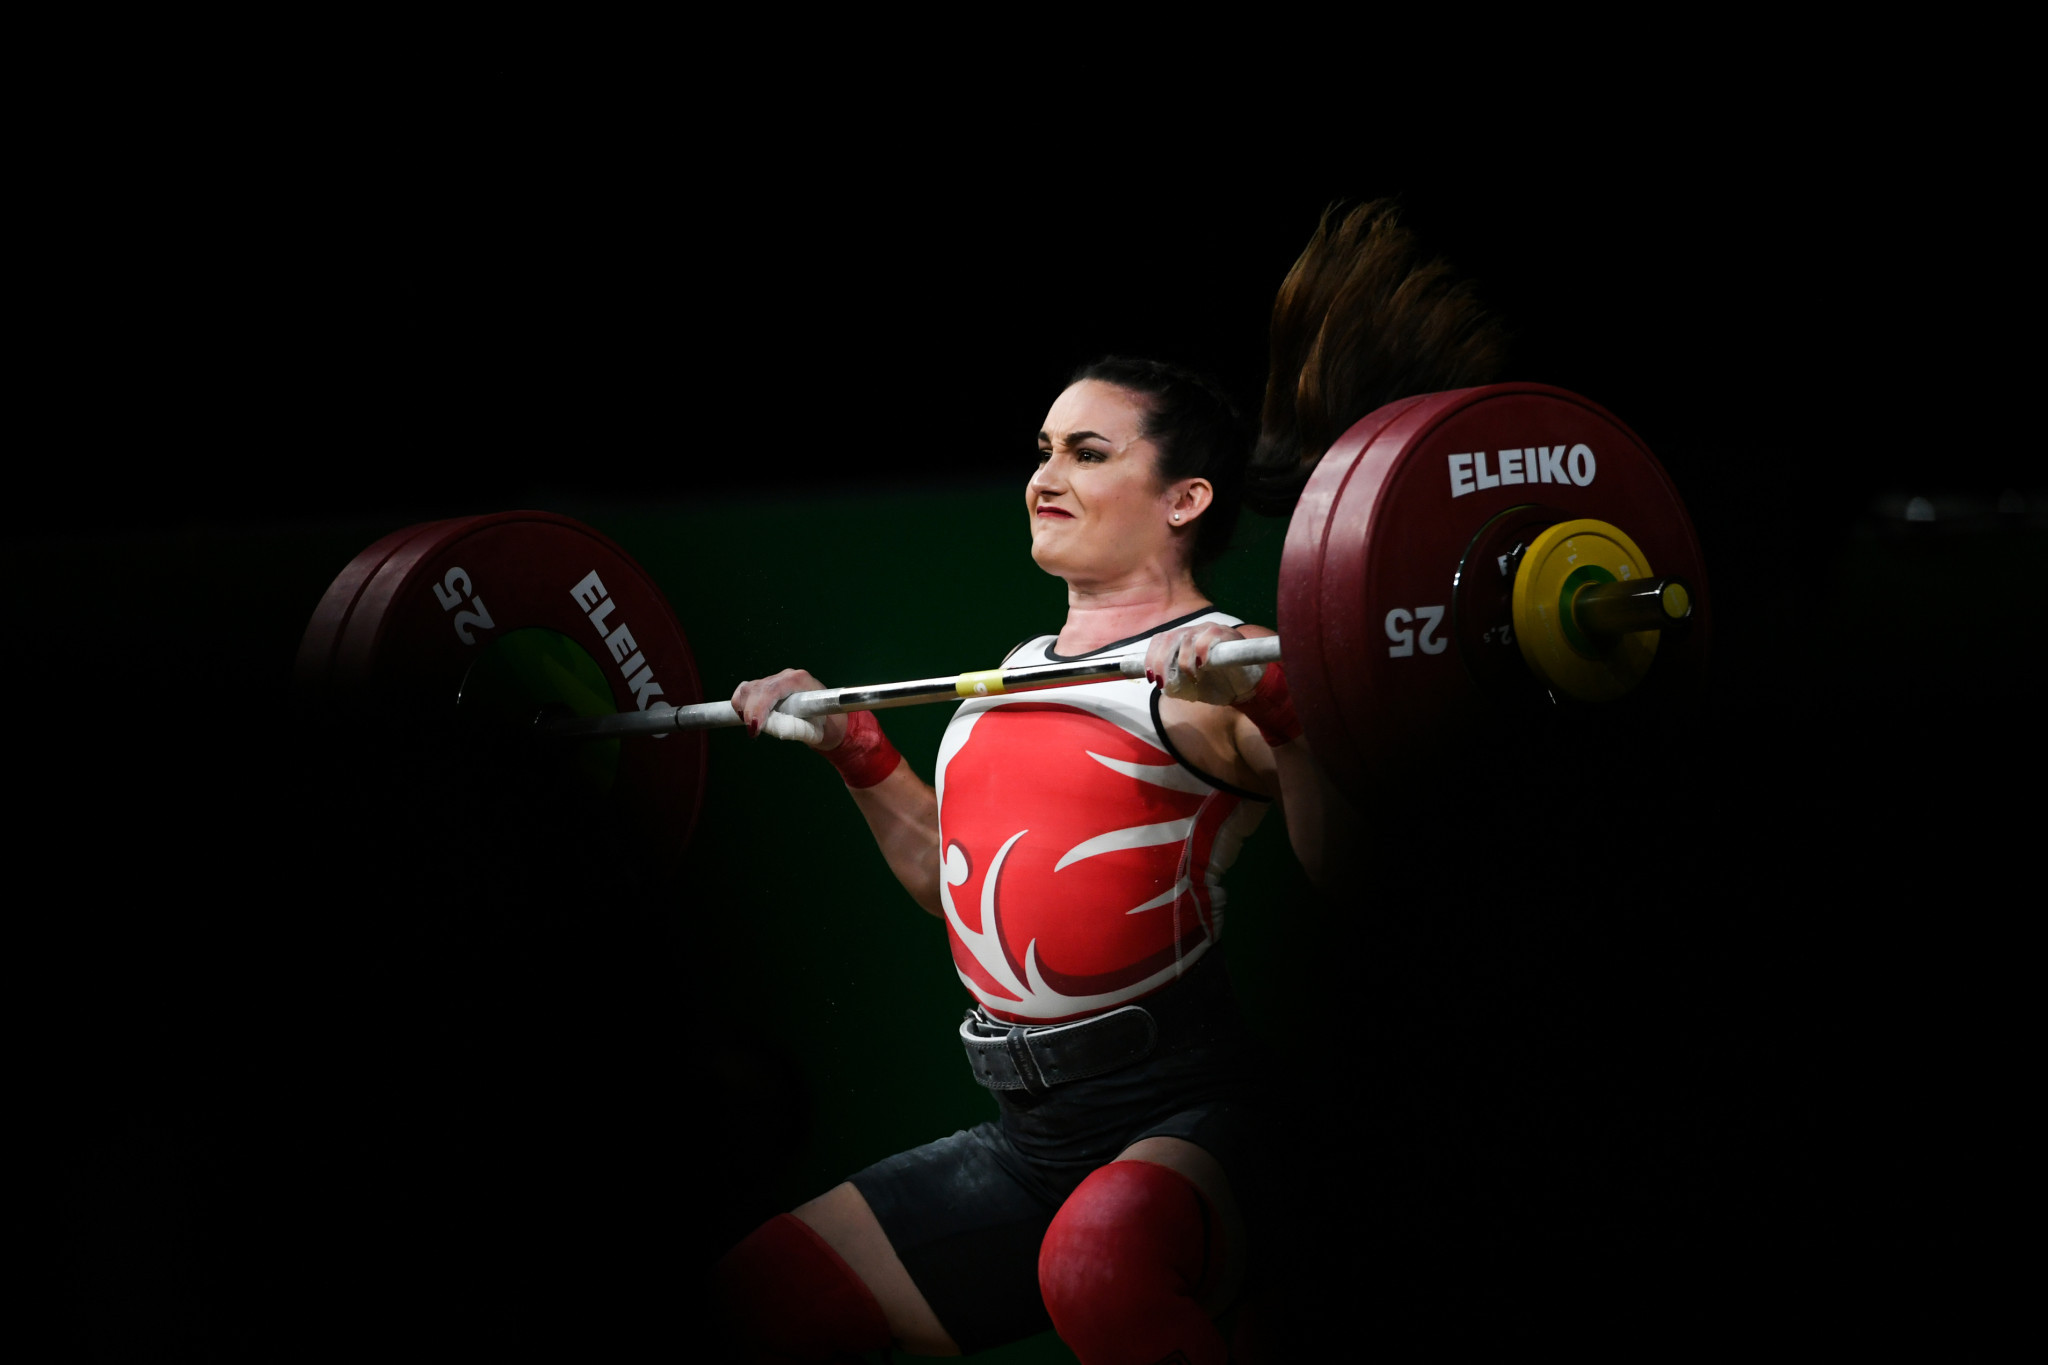 Landmark weightlifting medal for Britain’s Davies as American Alwine takes gold